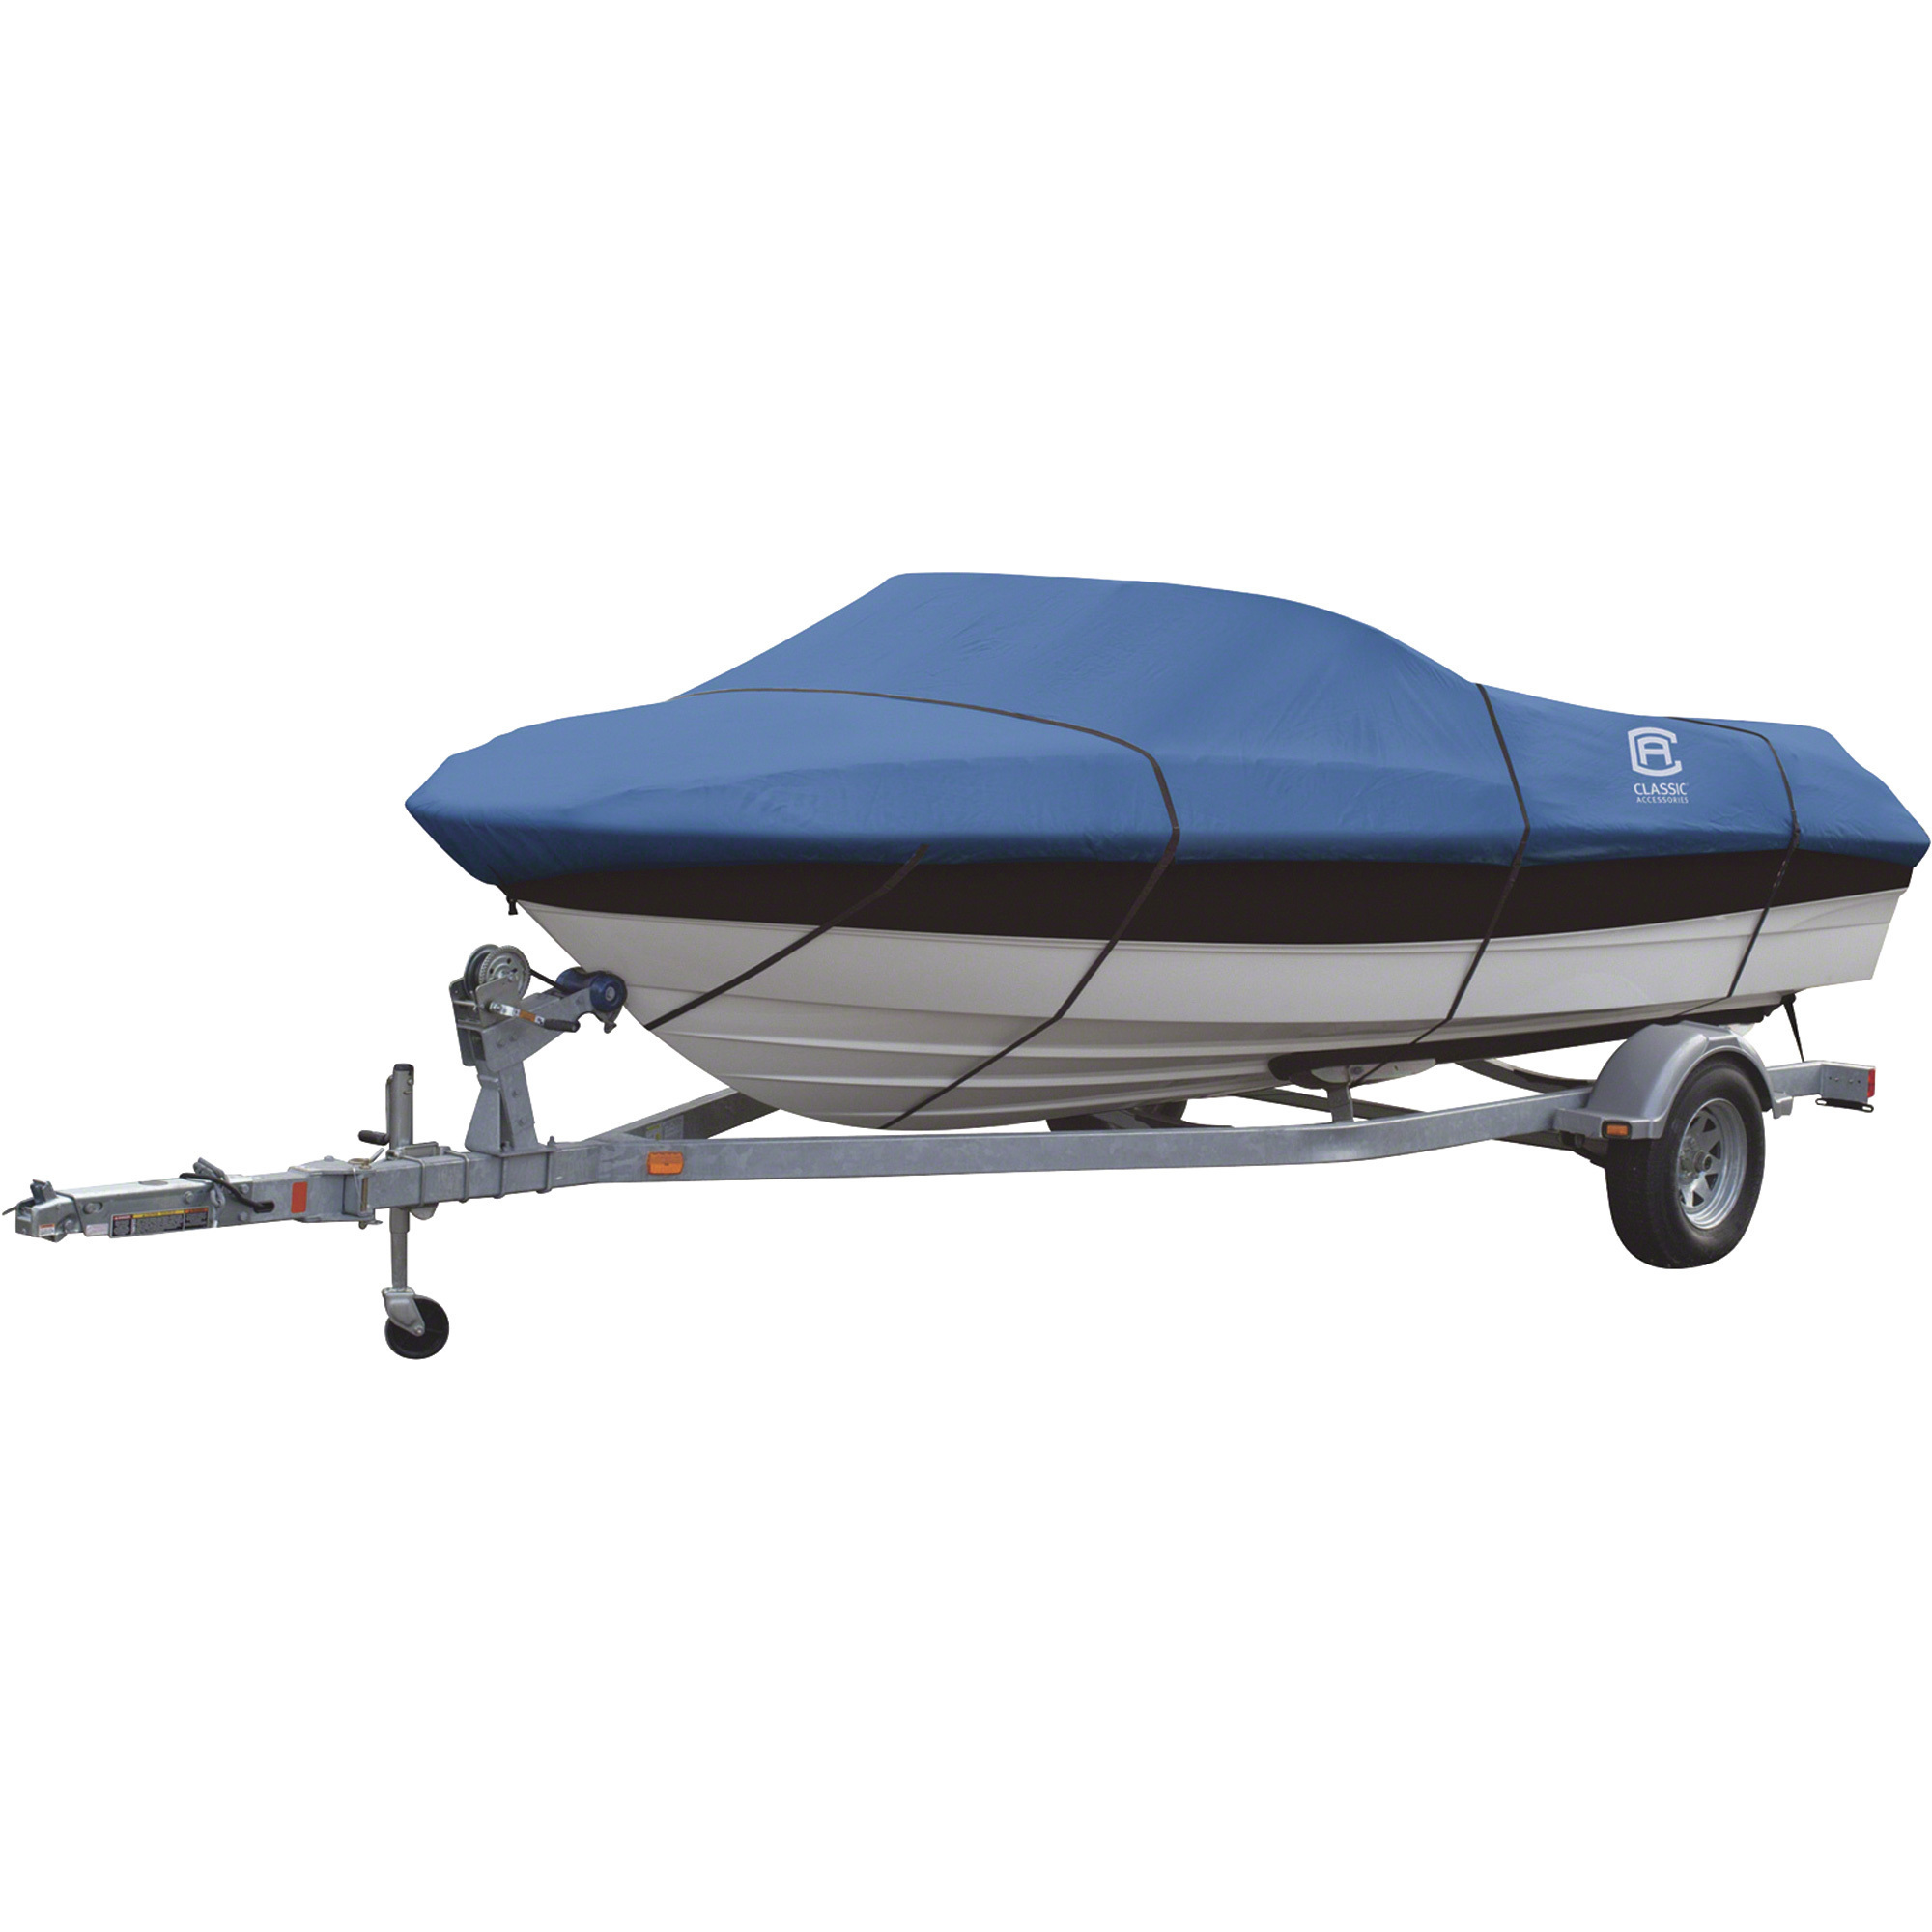 Classic Accessories Stellex All Seasons Boat Cover, Blue, Fits 14ft.-16ft. x 75Inch W Boats, Model 20-145-080501-00